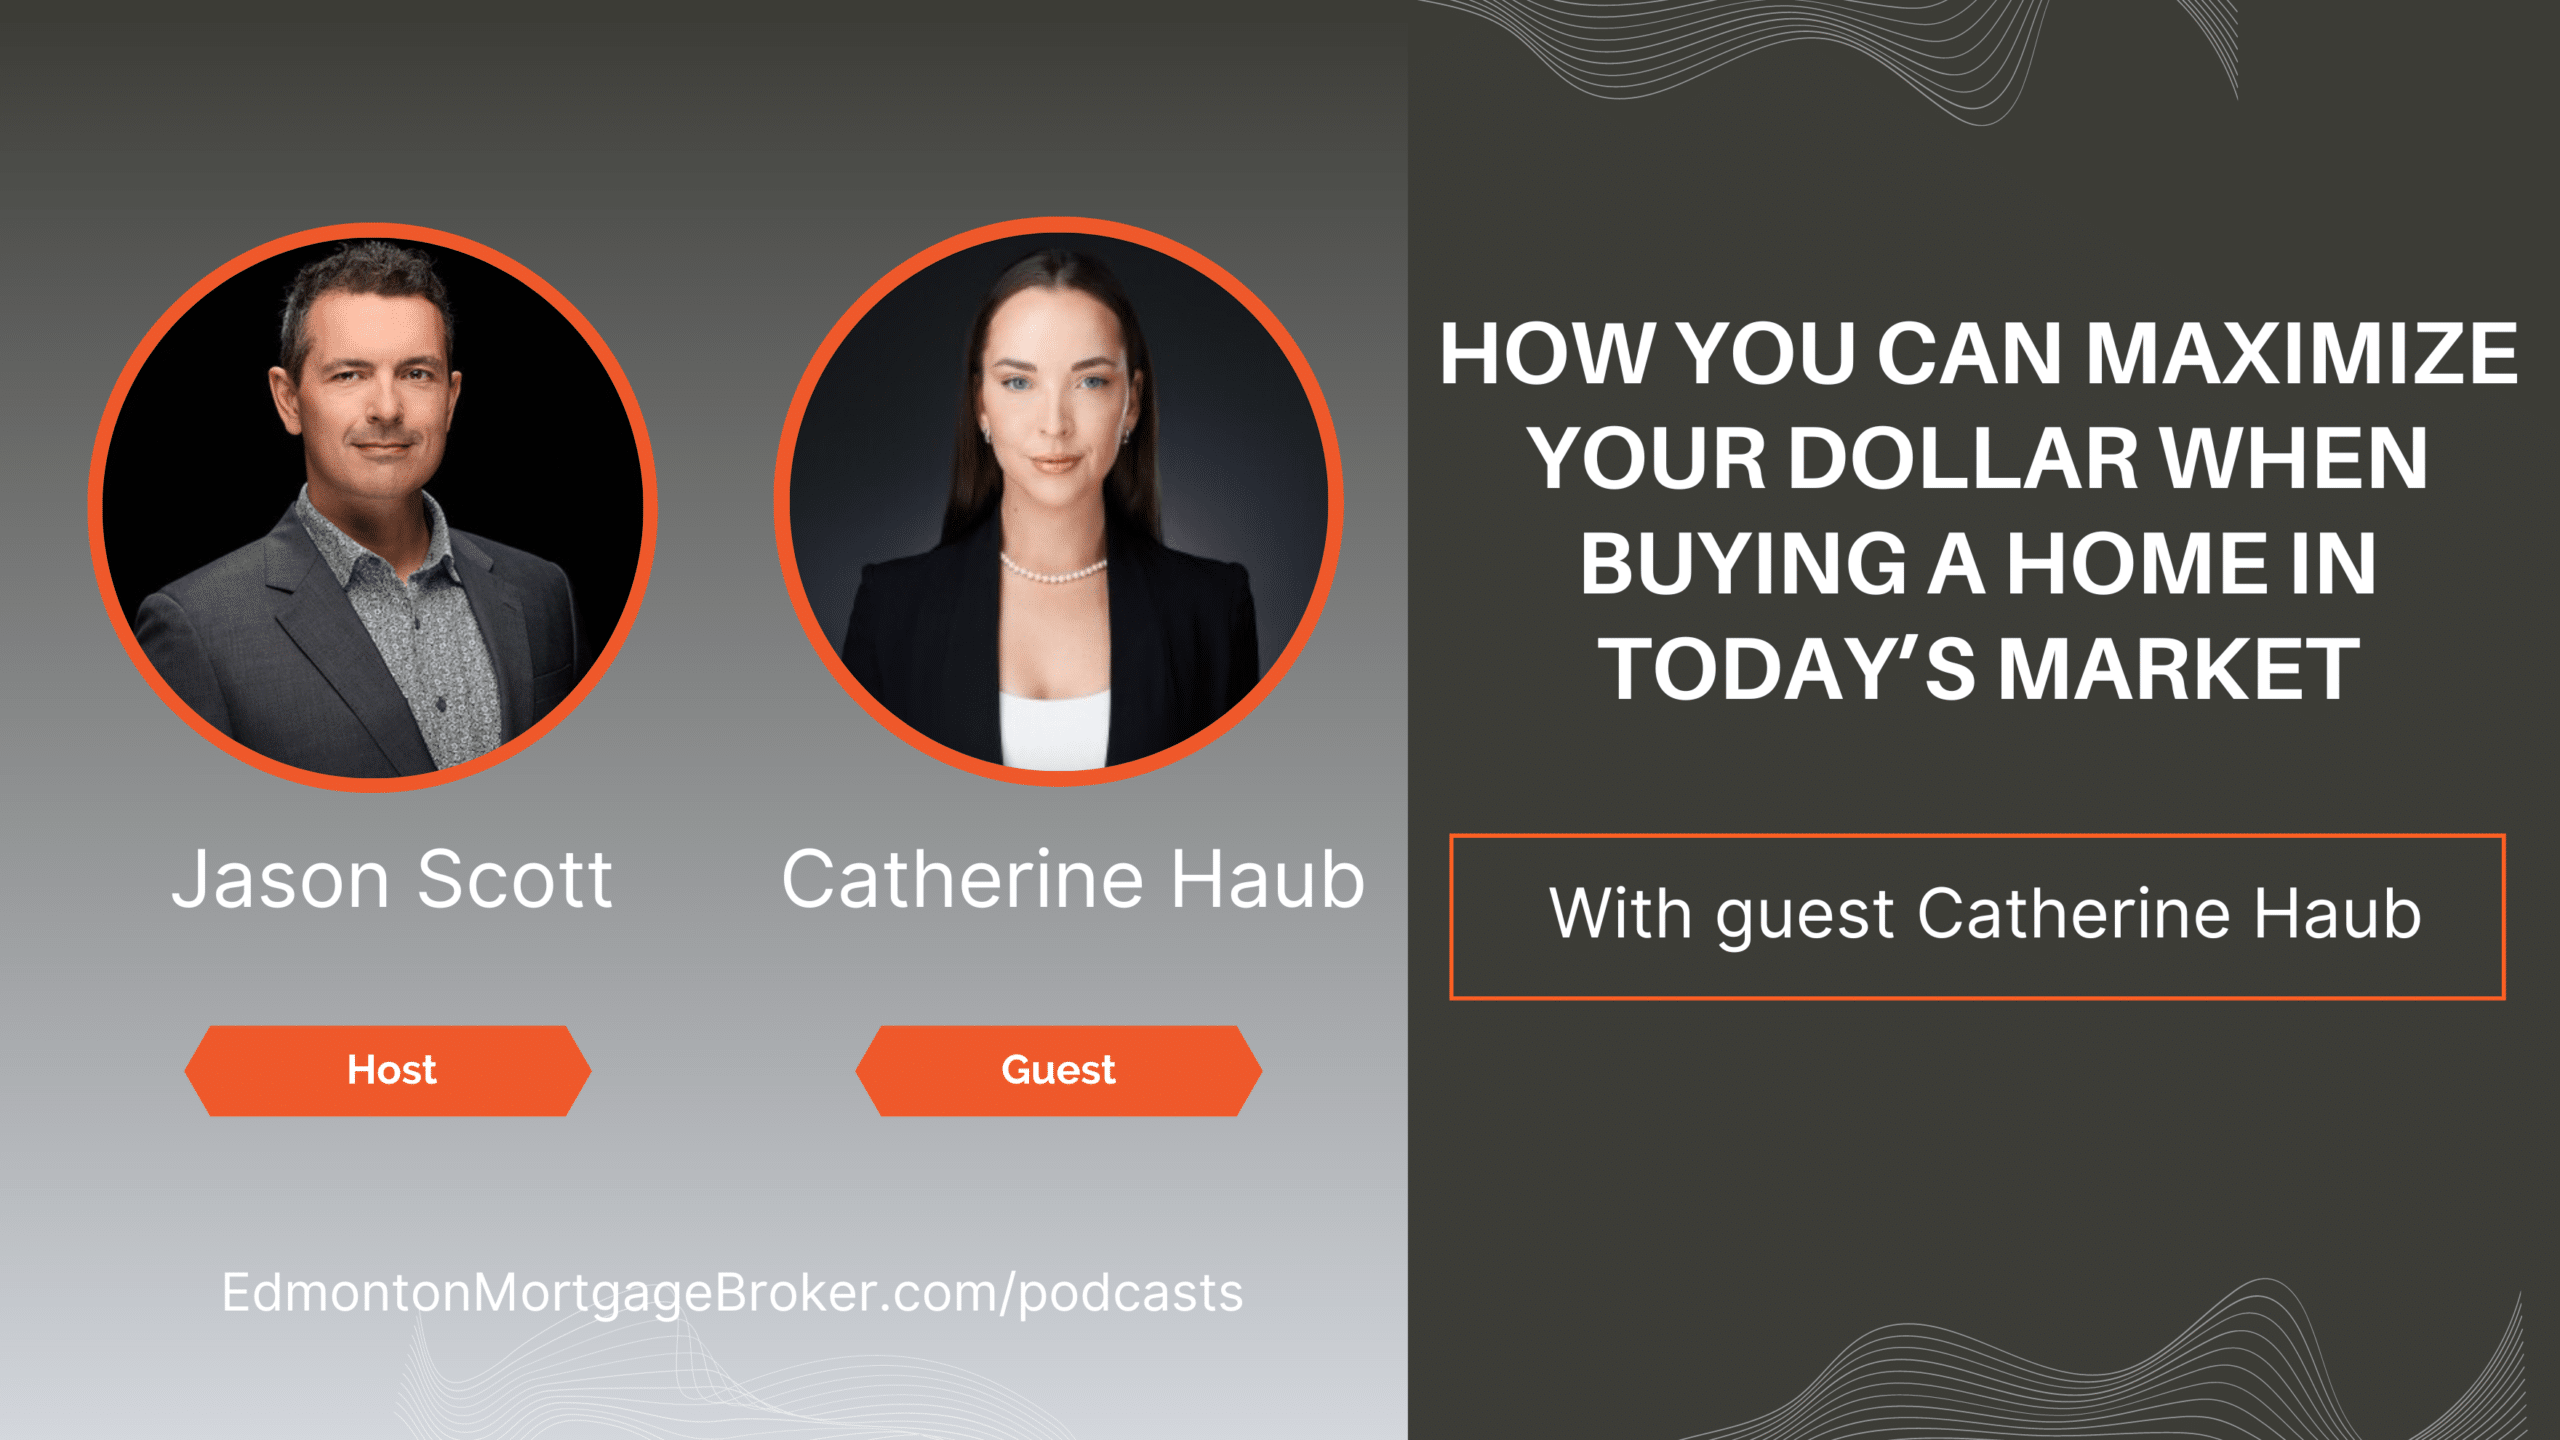 Catherine Haub and Jason do a podcast on how to maximize your dollar when buying a home